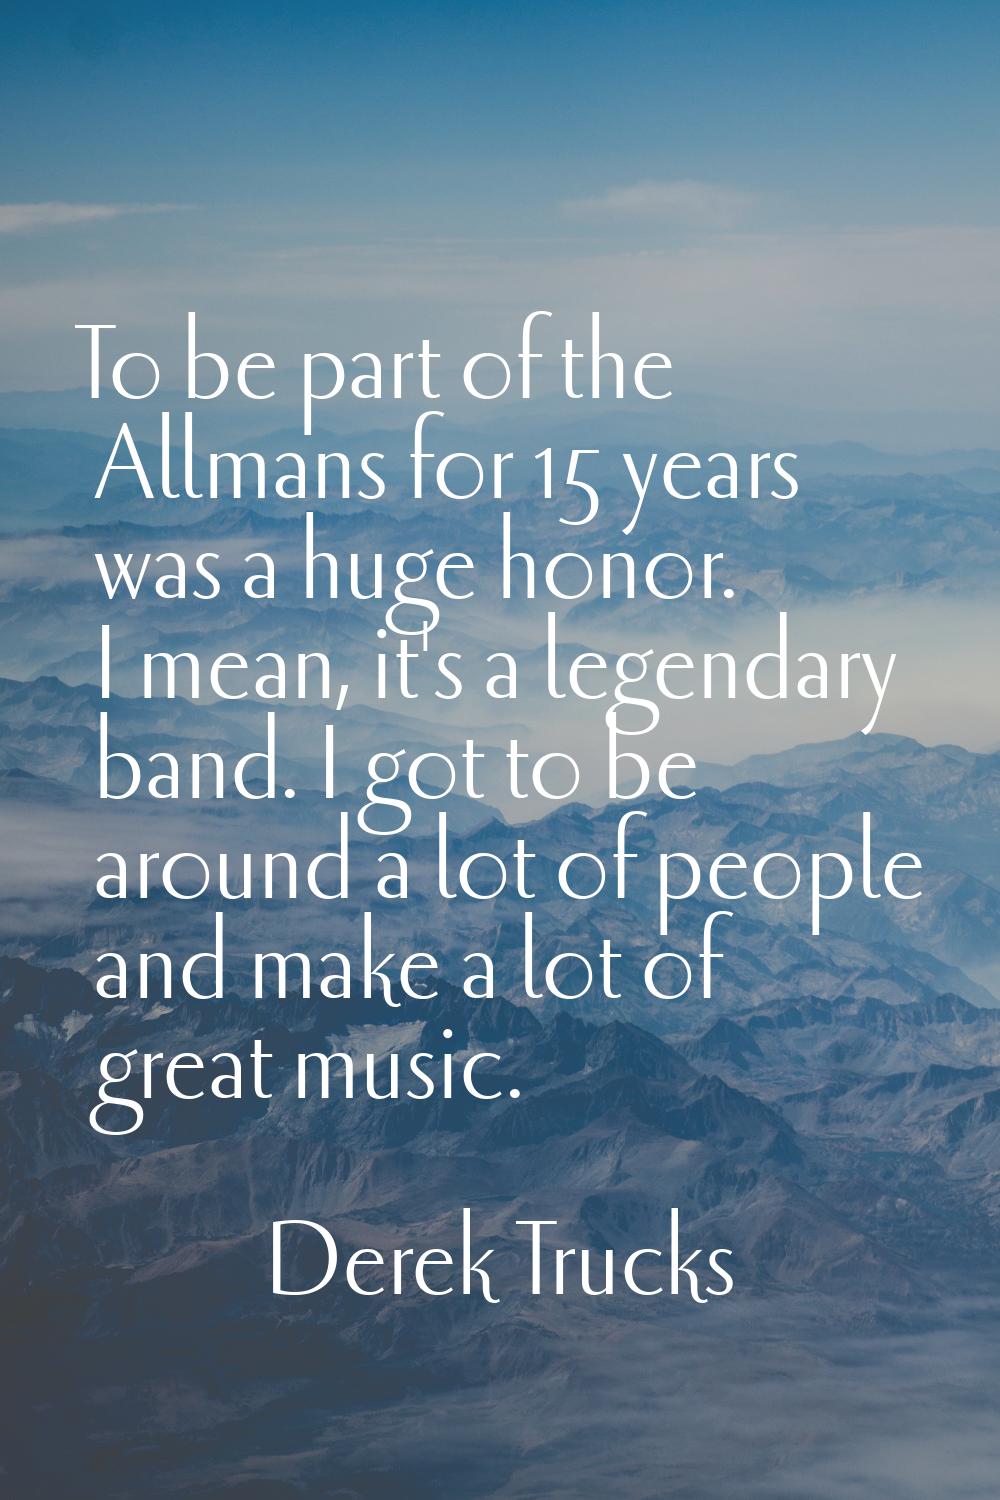 To be part of the Allmans for 15 years was a huge honor. I mean, it's a legendary band. I got to be